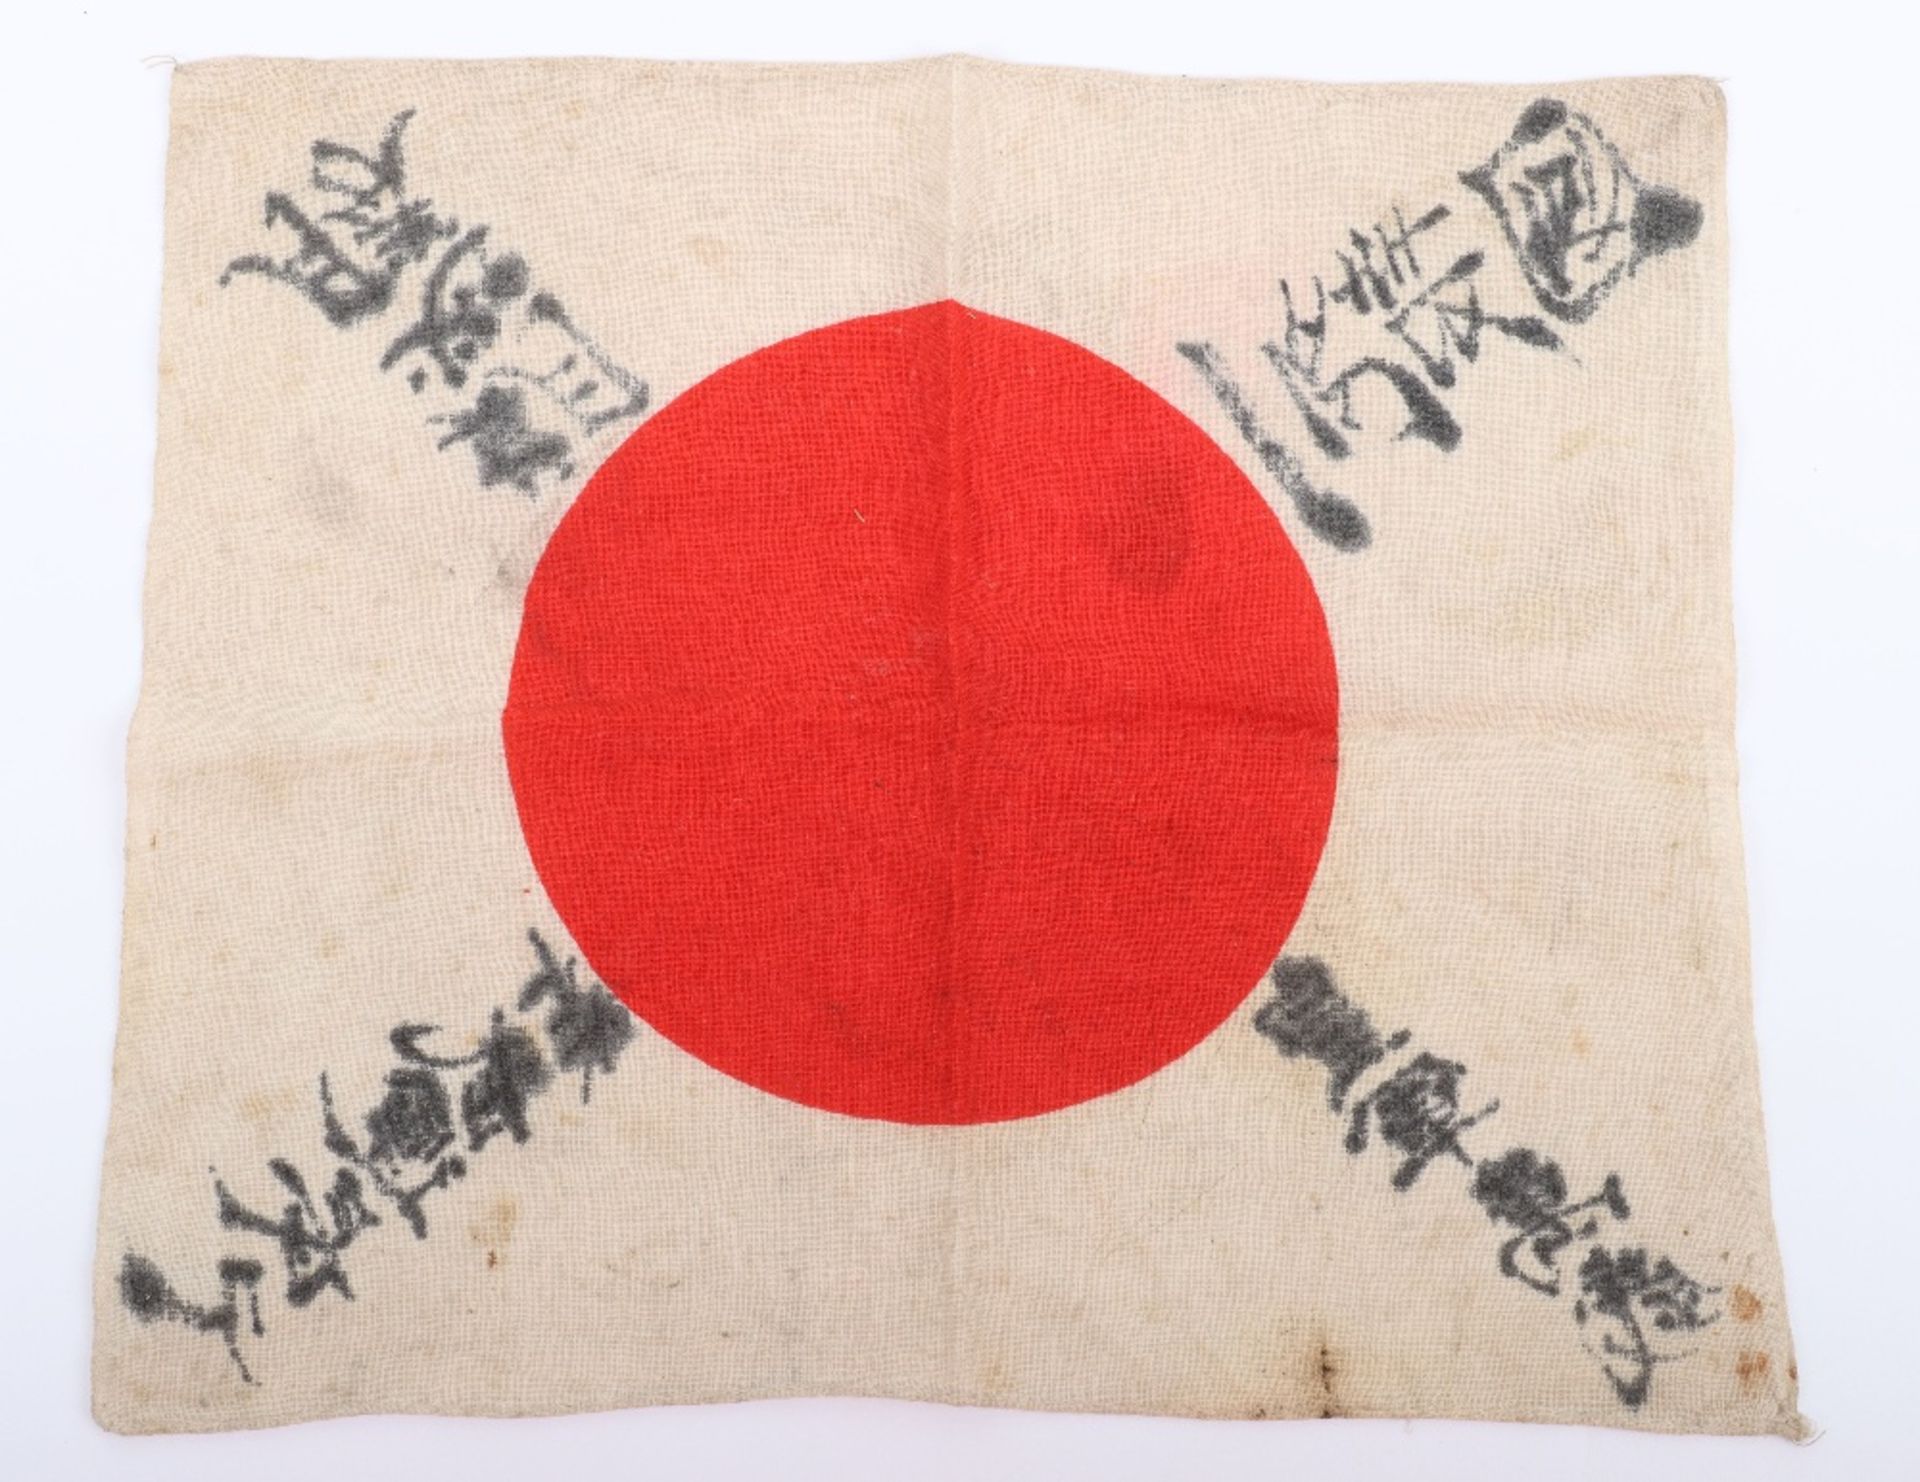 Small WW2 Japanese Signed Flag